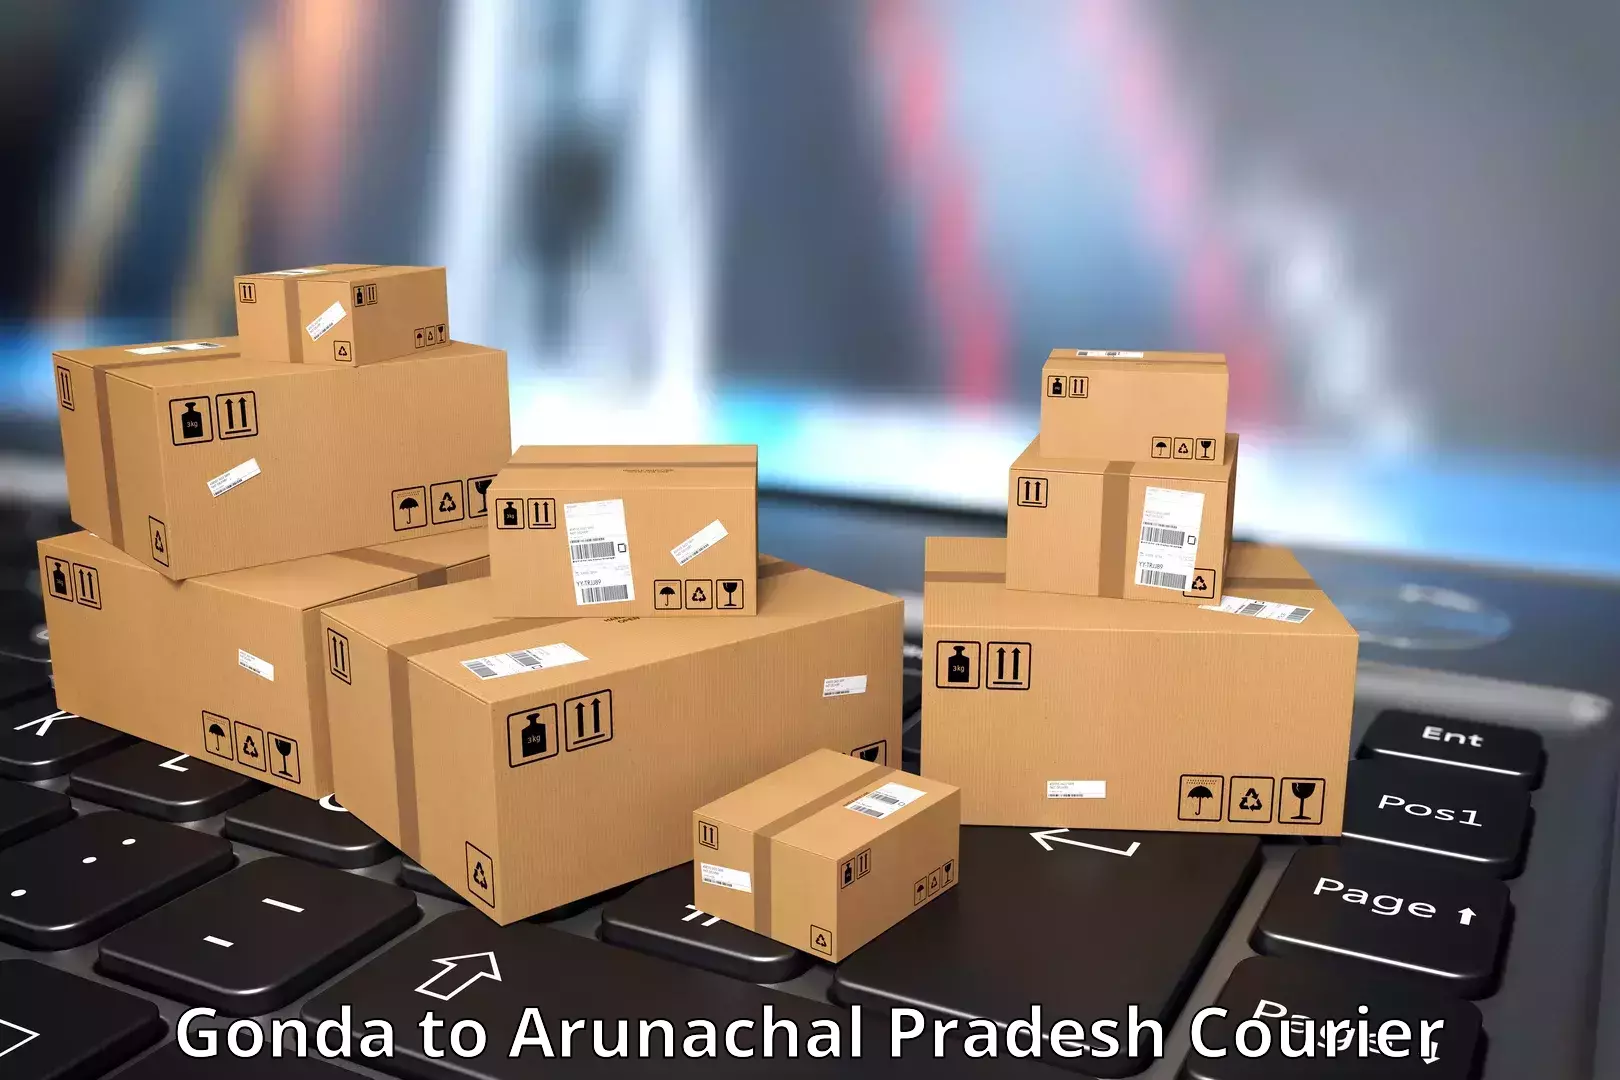 Full-service courier options Gonda to Lohit